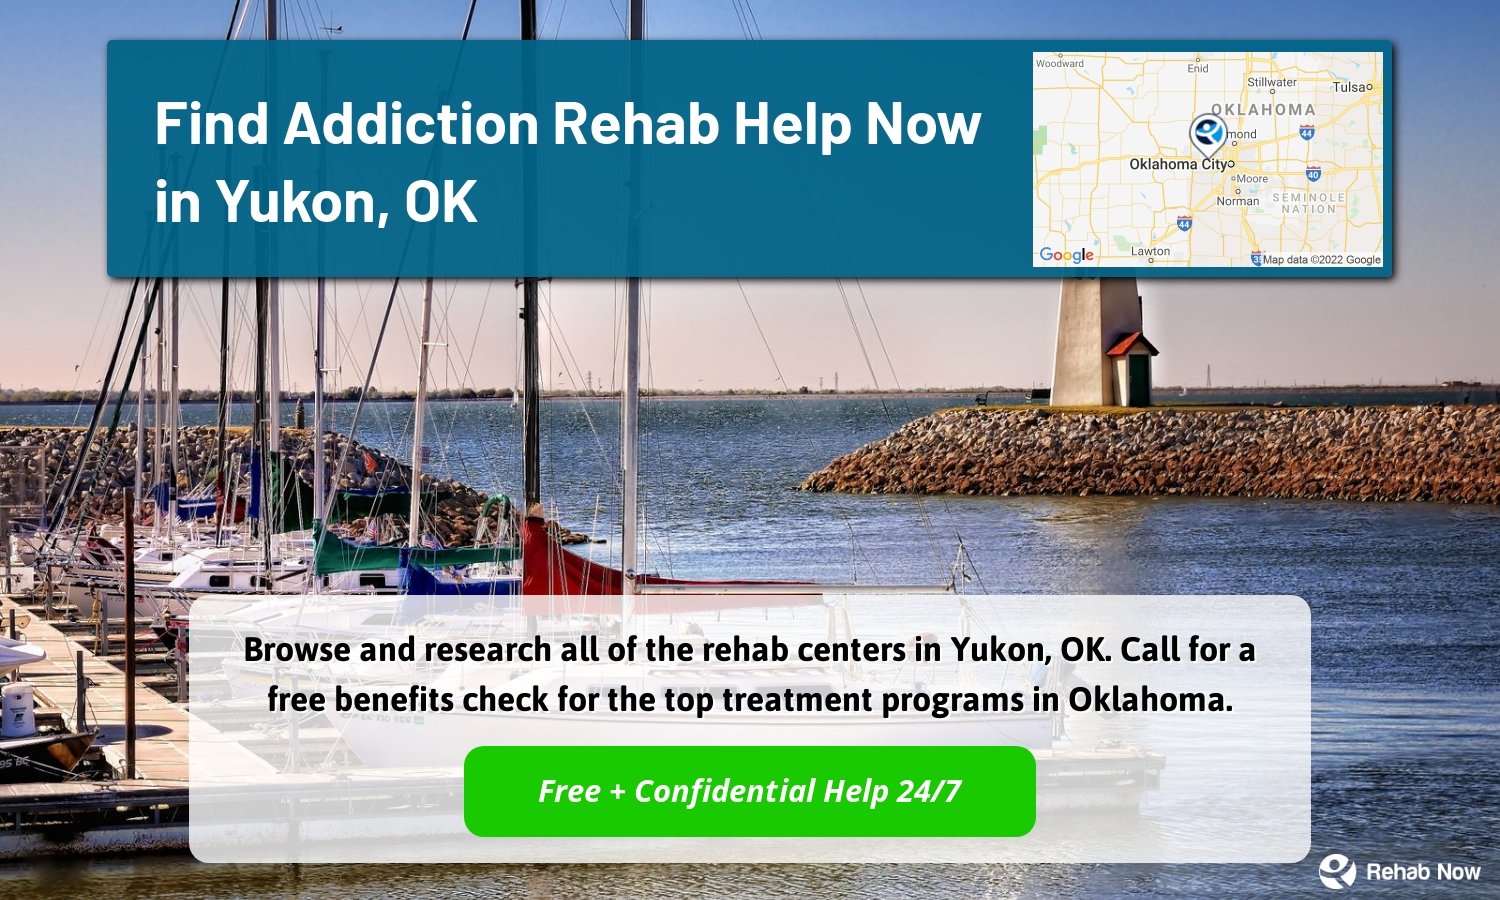 Browse and research all of the rehab centers in Yukon, OK. Call for a free benefits check for the top treatment programs in Oklahoma.